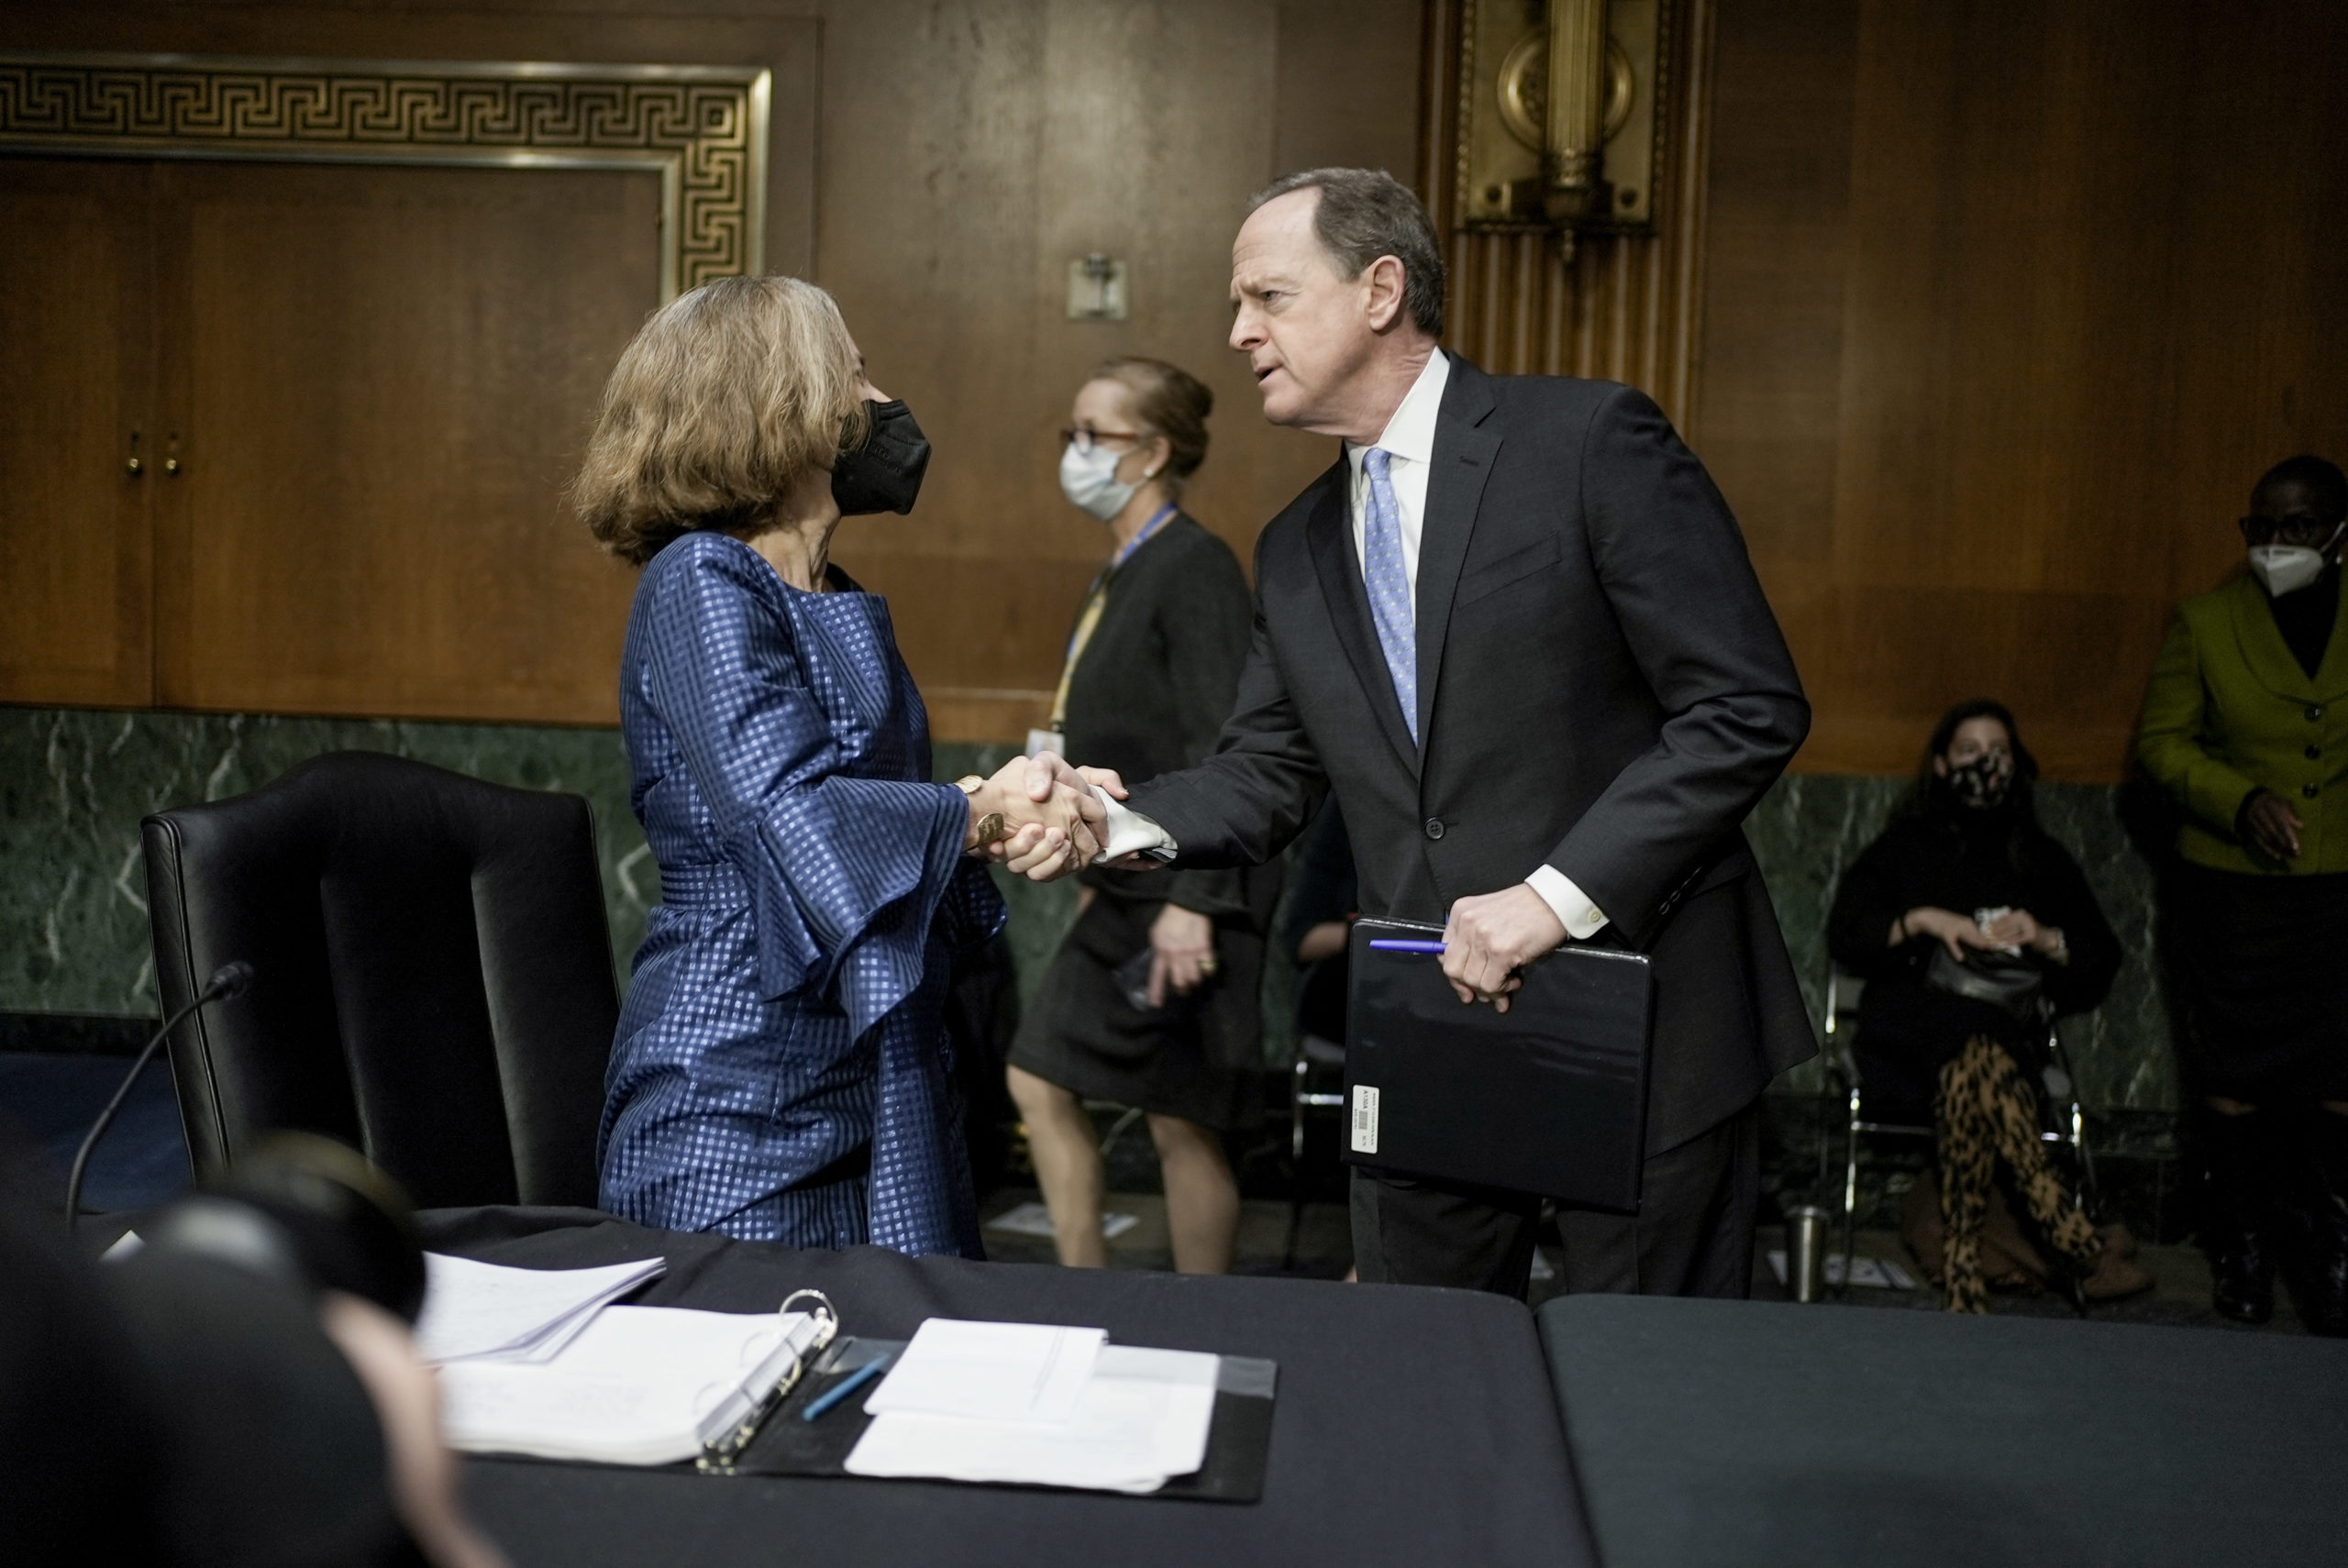 Sarah Bloom Raskin, President Joe Biden's nominee for vice chair of the Fed, greets Banking Committee Ranking Member Pat Toomey before her confirmation hearing Thursday. (Ken Cedeno/Pool/Getty Images)